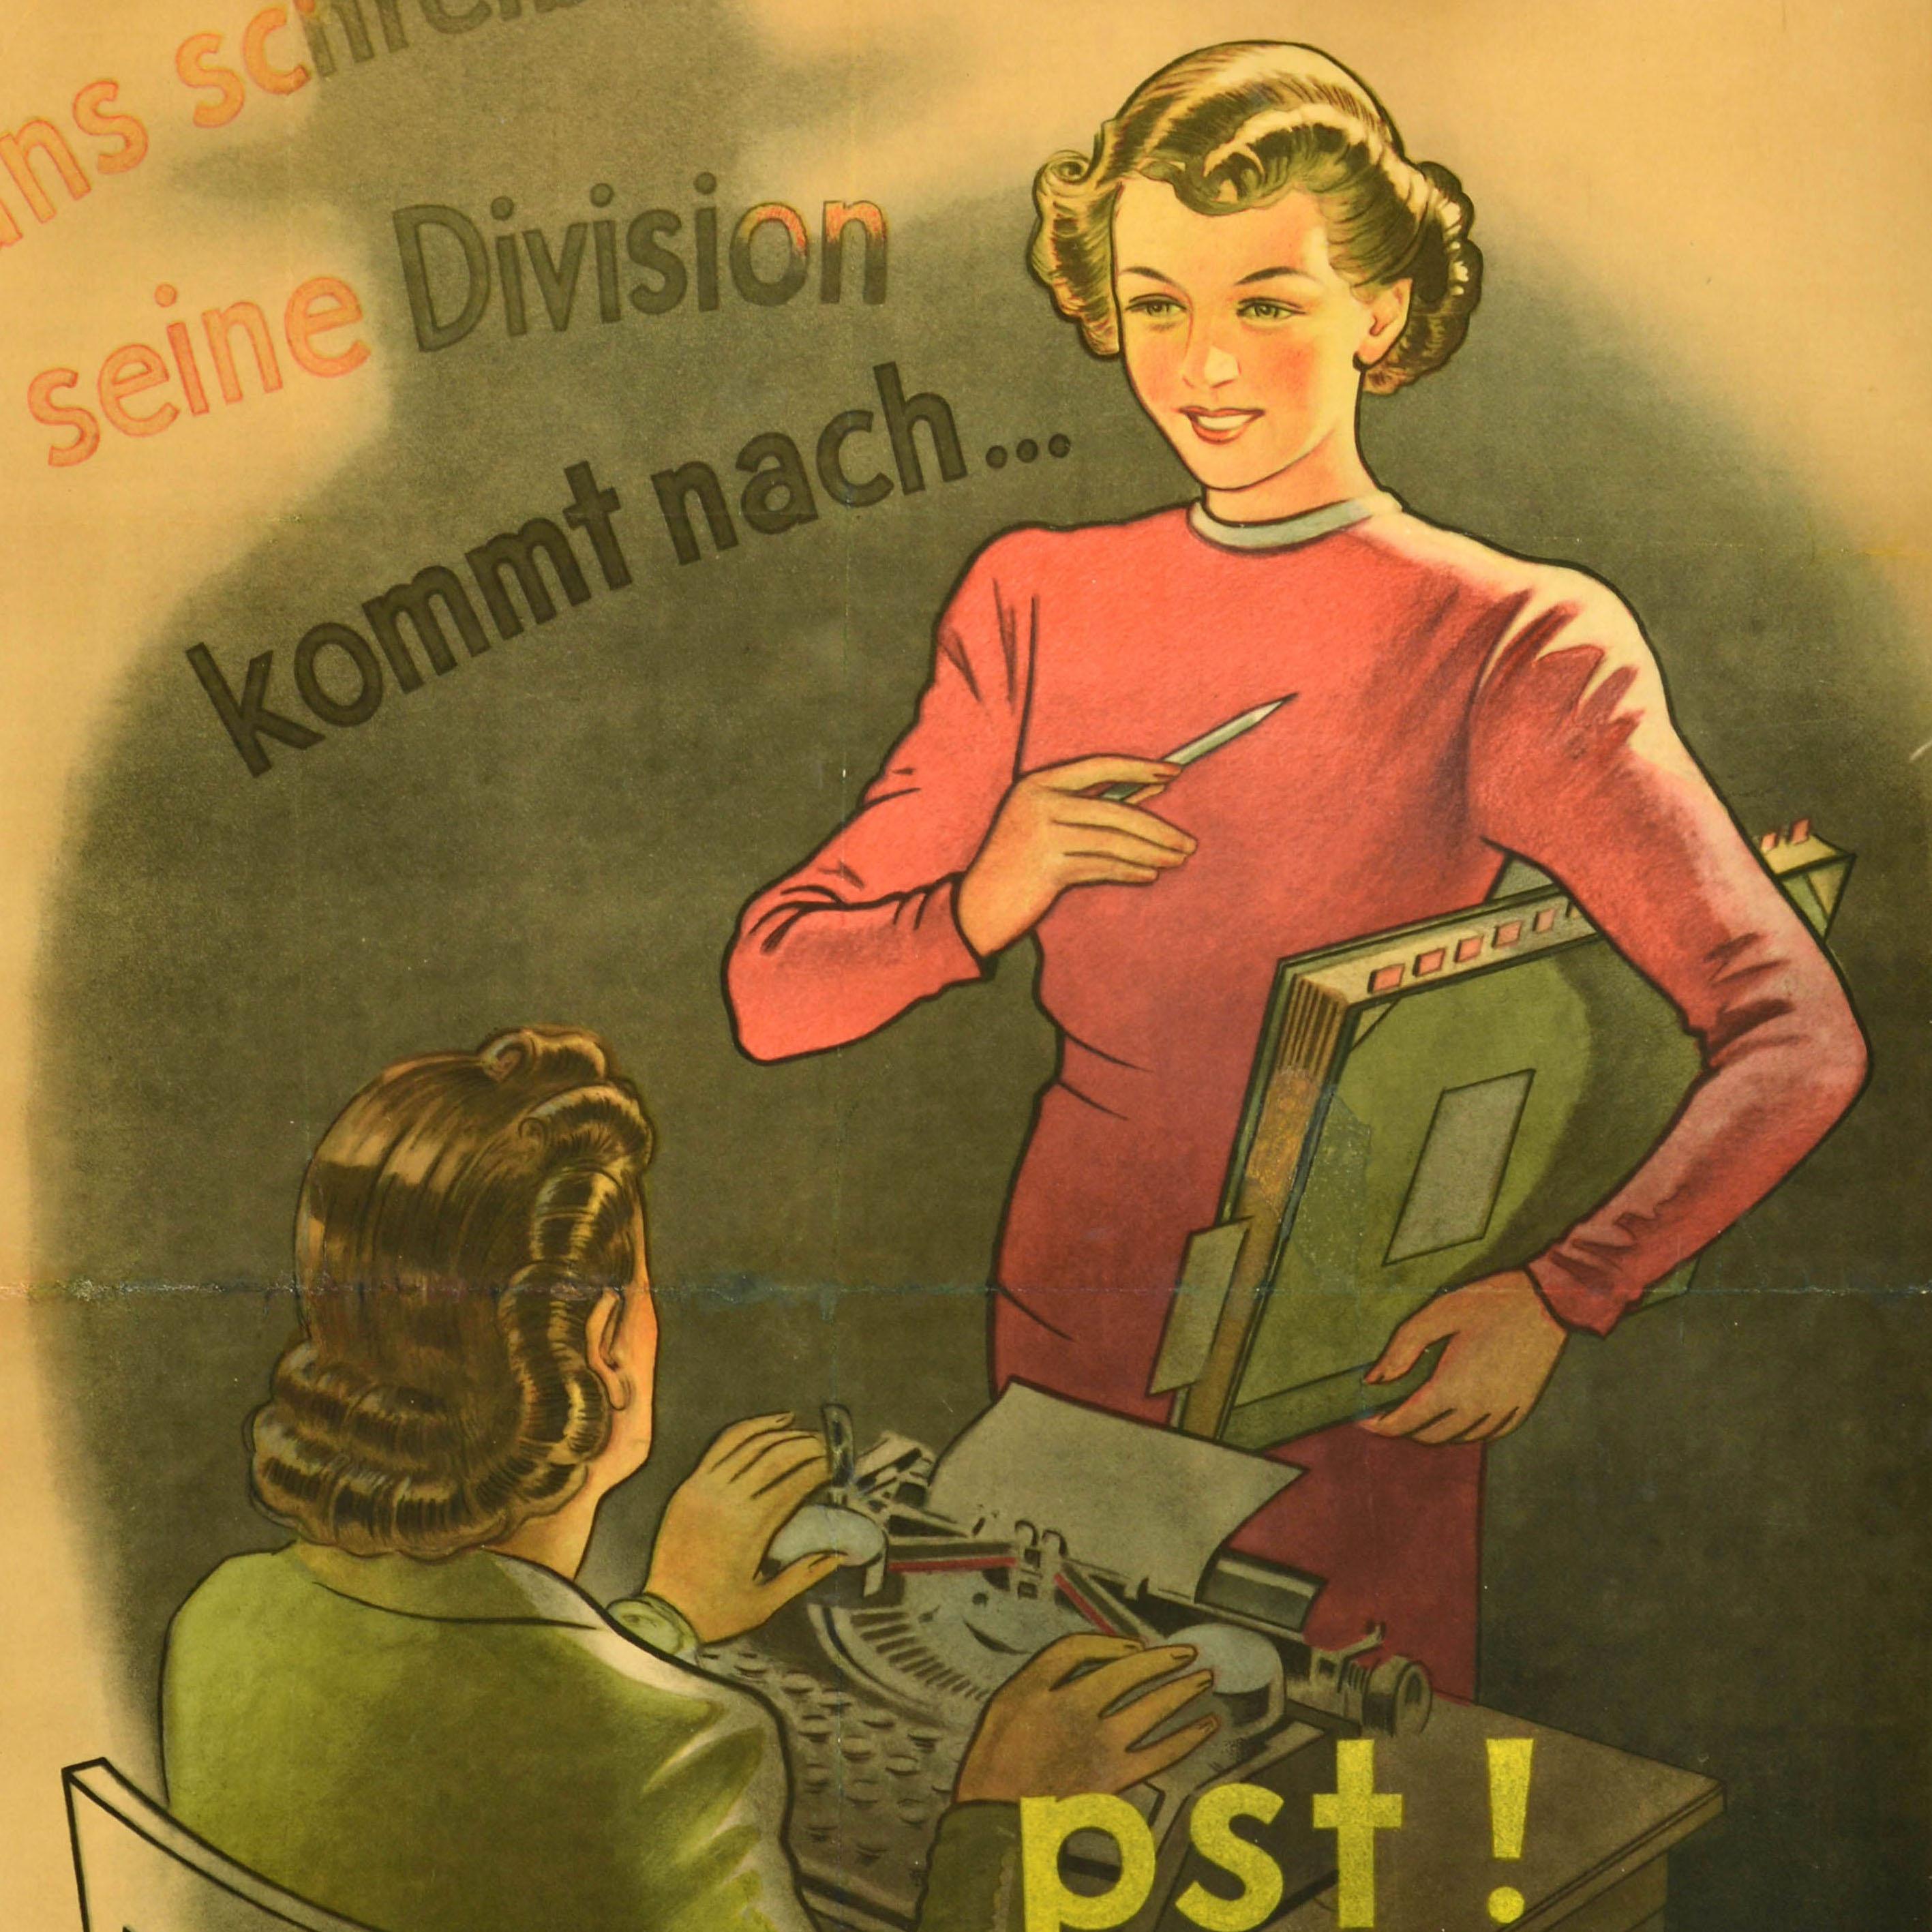 Original vintage World War Two poster issued in Nazi Germany - Hans schreibt seine Division kommt nach... pst! Feind hort mit! / Hans writes his division comes after... psst! The enemy is listening in! - featuring a secretary typing on a typewriter